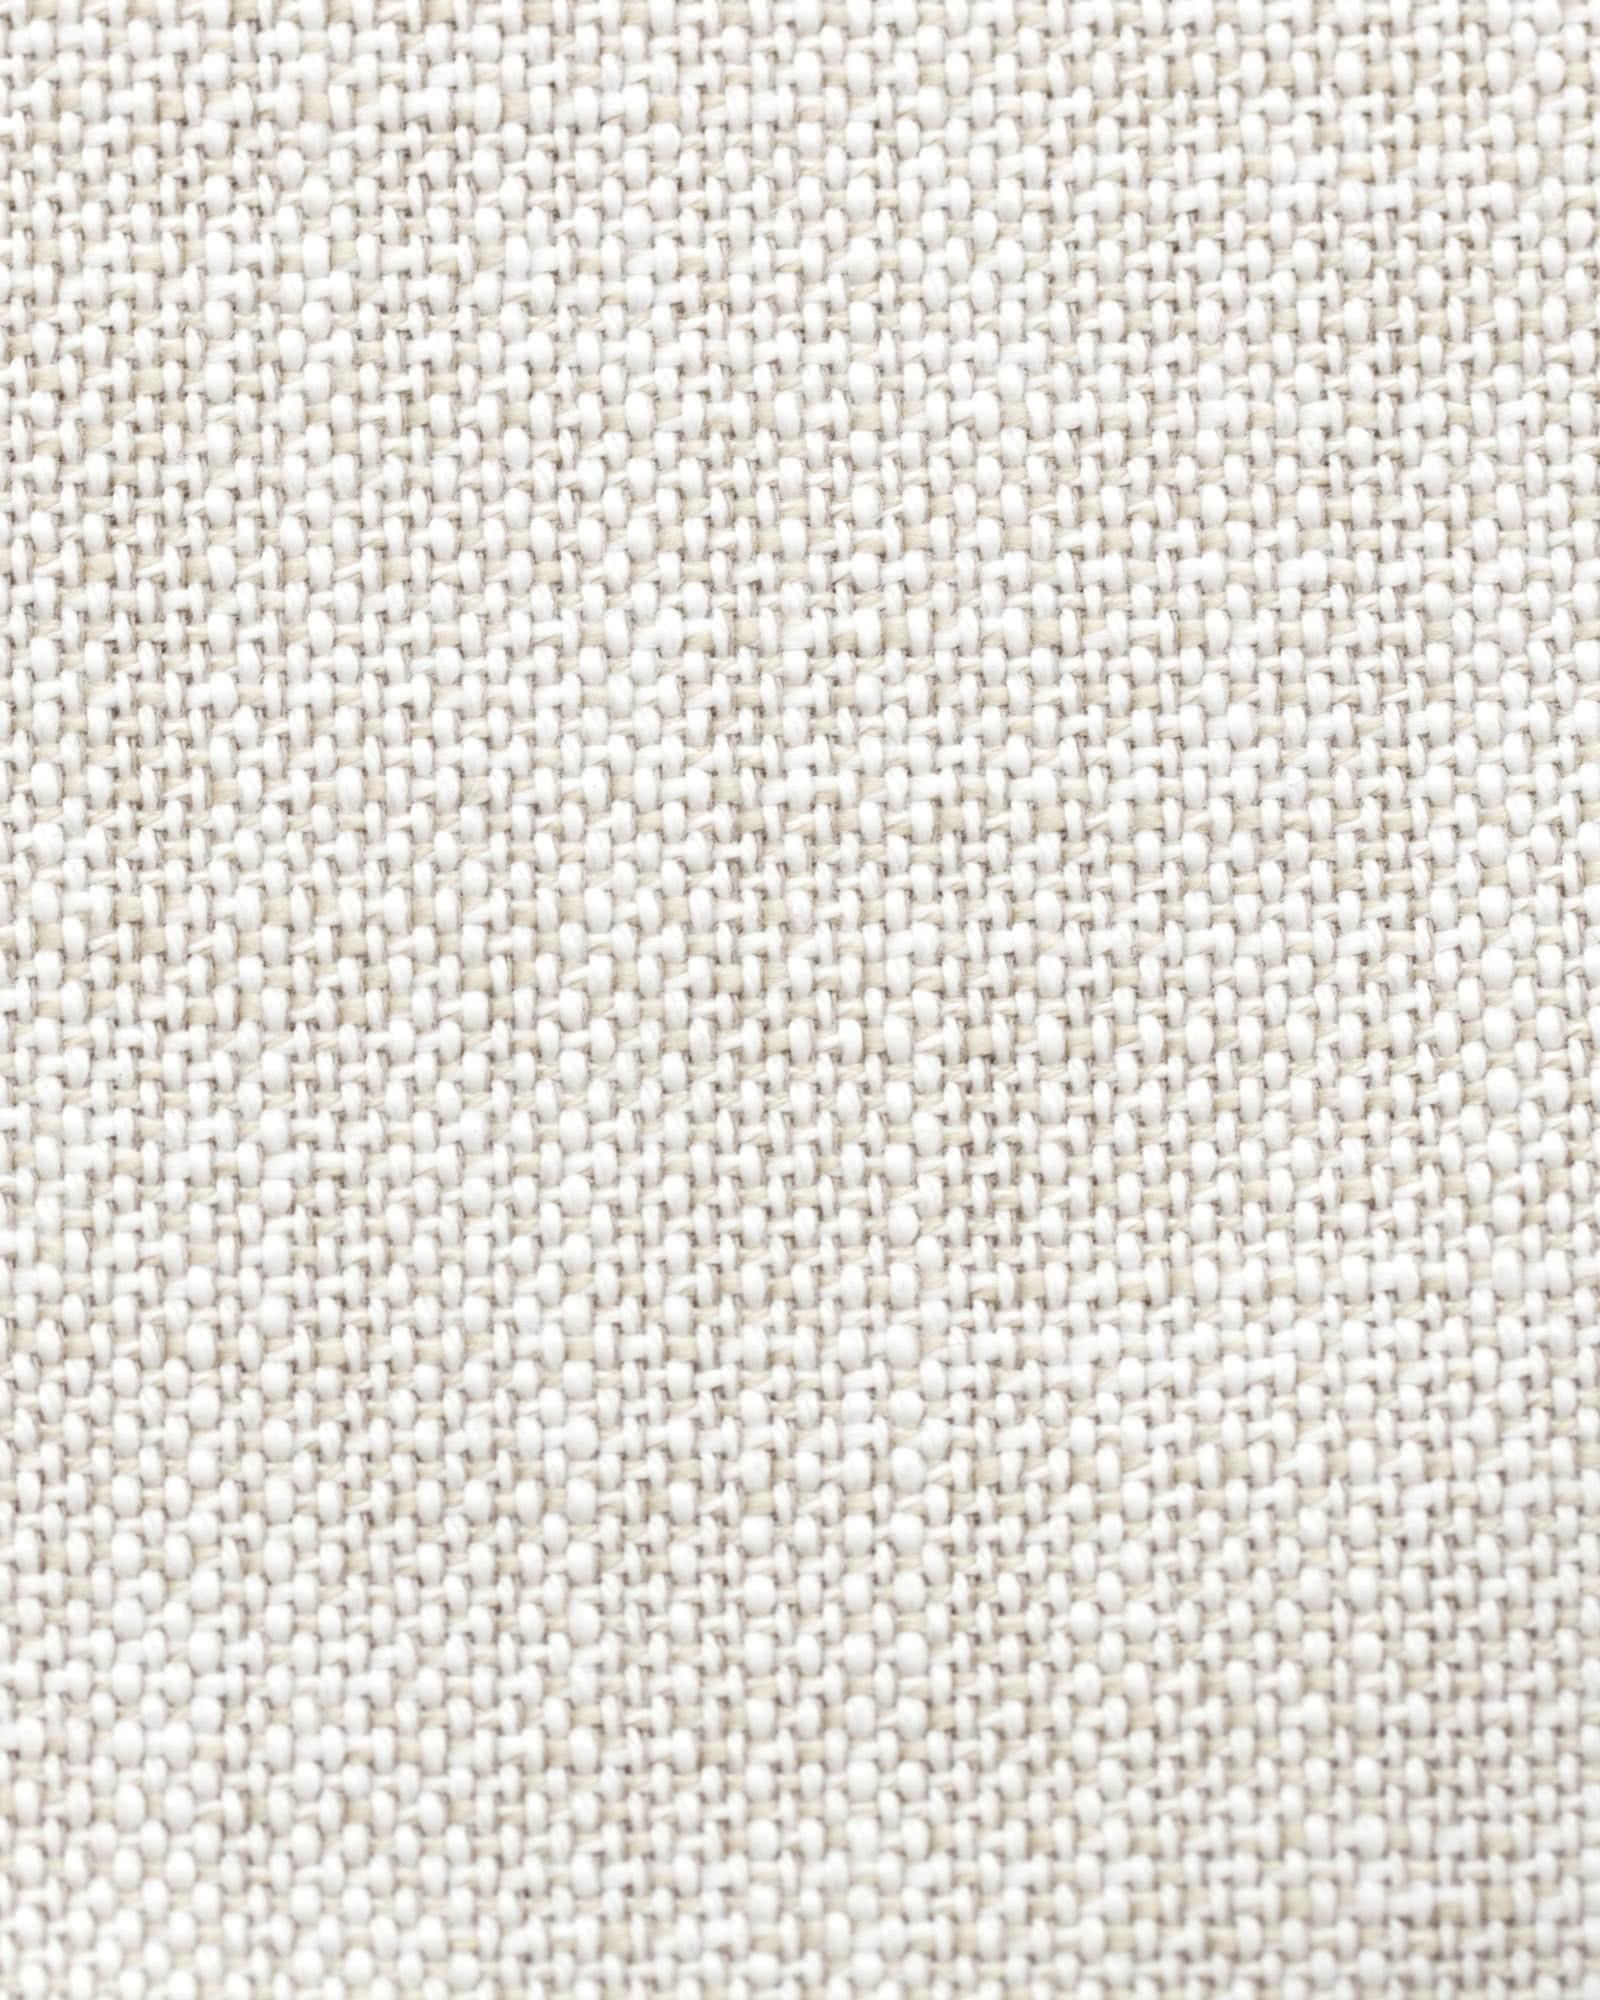 Fabric by the Yard – Perennials Basketweave Fabric | Serena and Lily